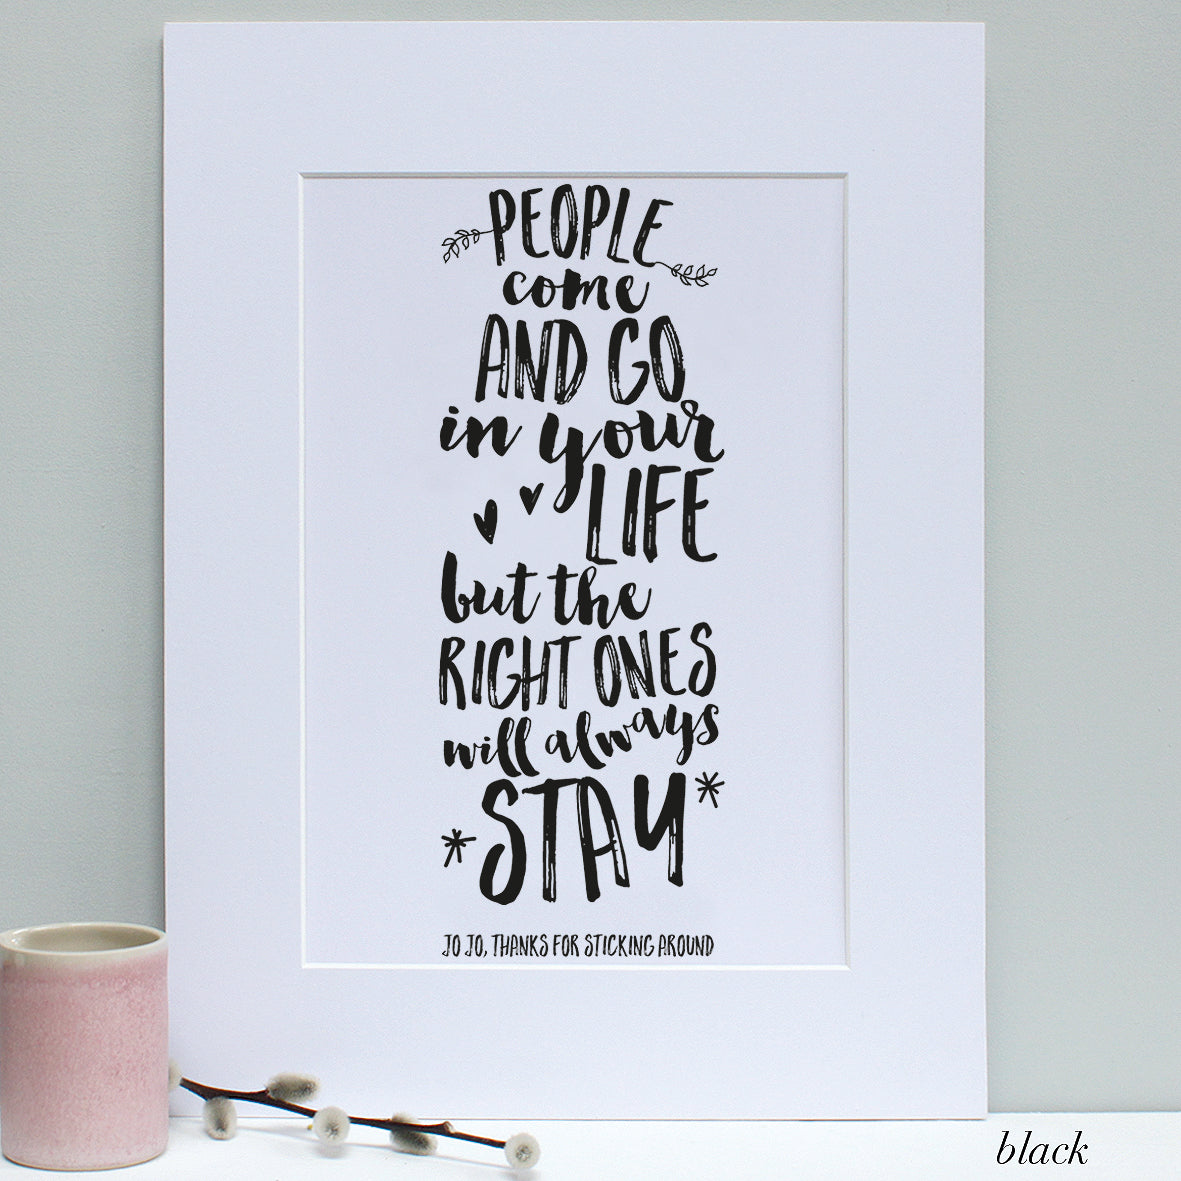 personalised black friend quote print, white mount